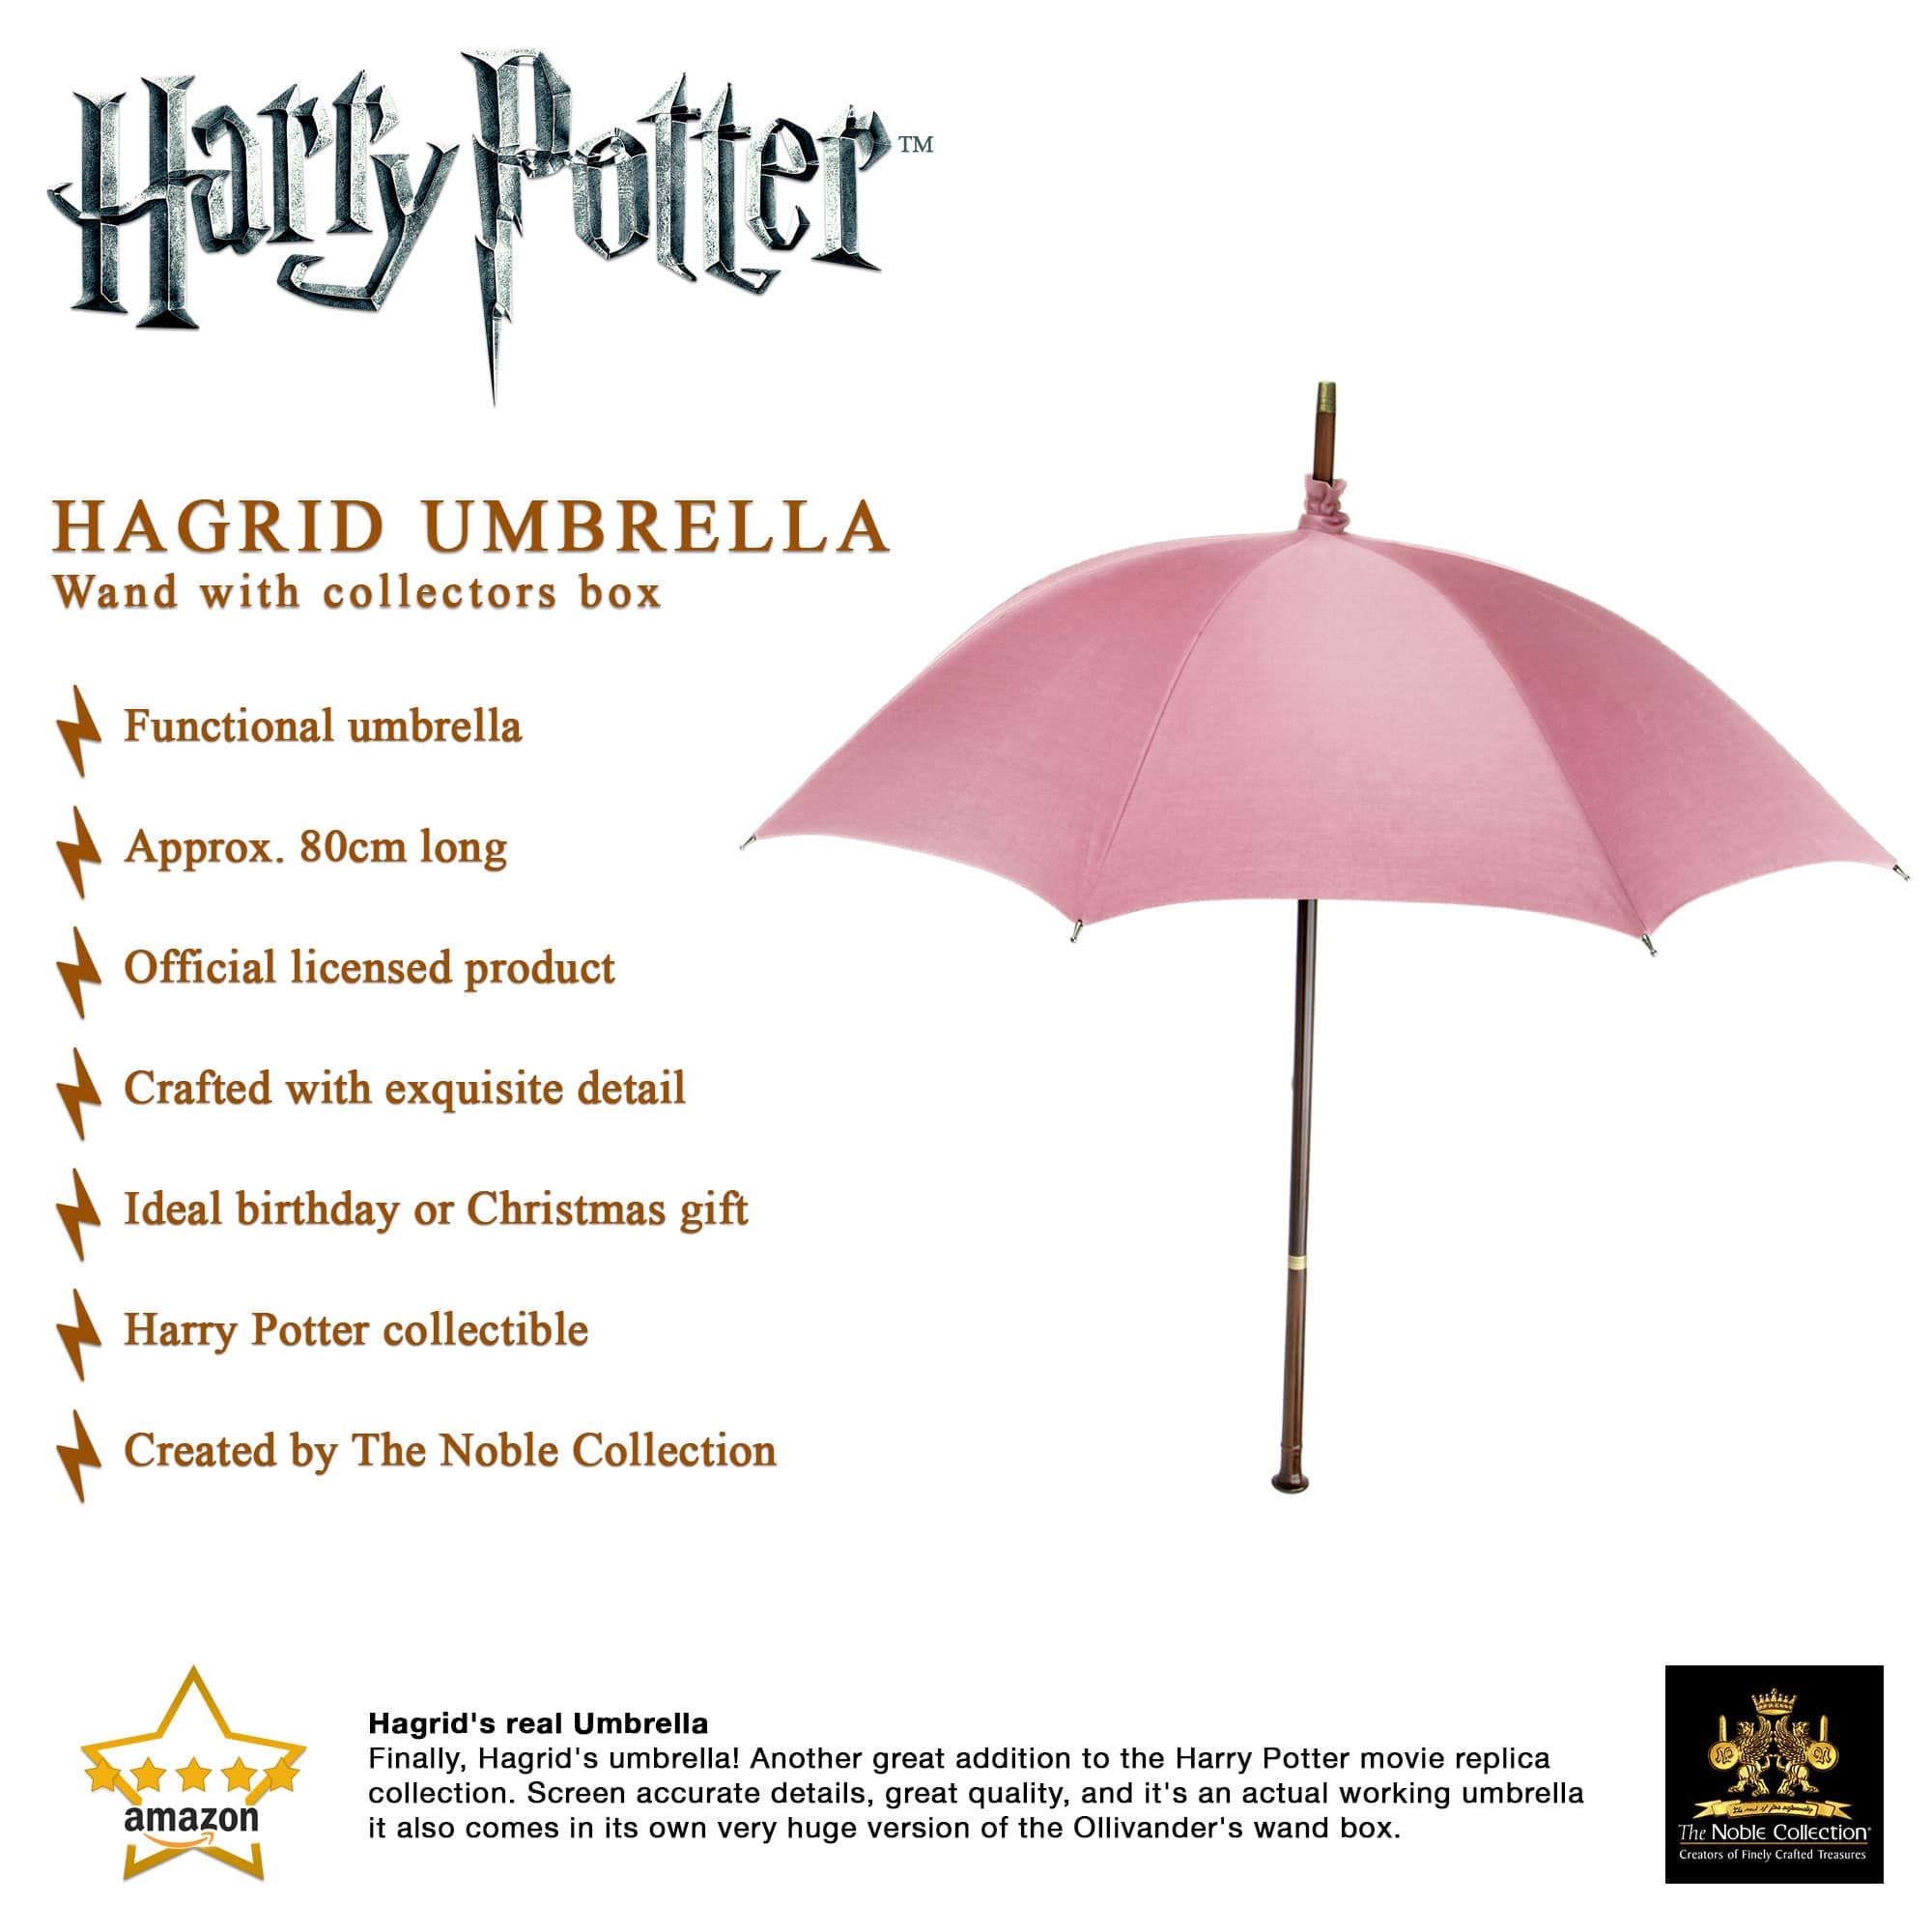 The Noble Collection Harry Potter Rubeus Hagrid Umbrella Wand in Collectors Box - 31in (80cm) Officially Licensed Functional Umbrella Wand - Film Set Movie Props Gifts